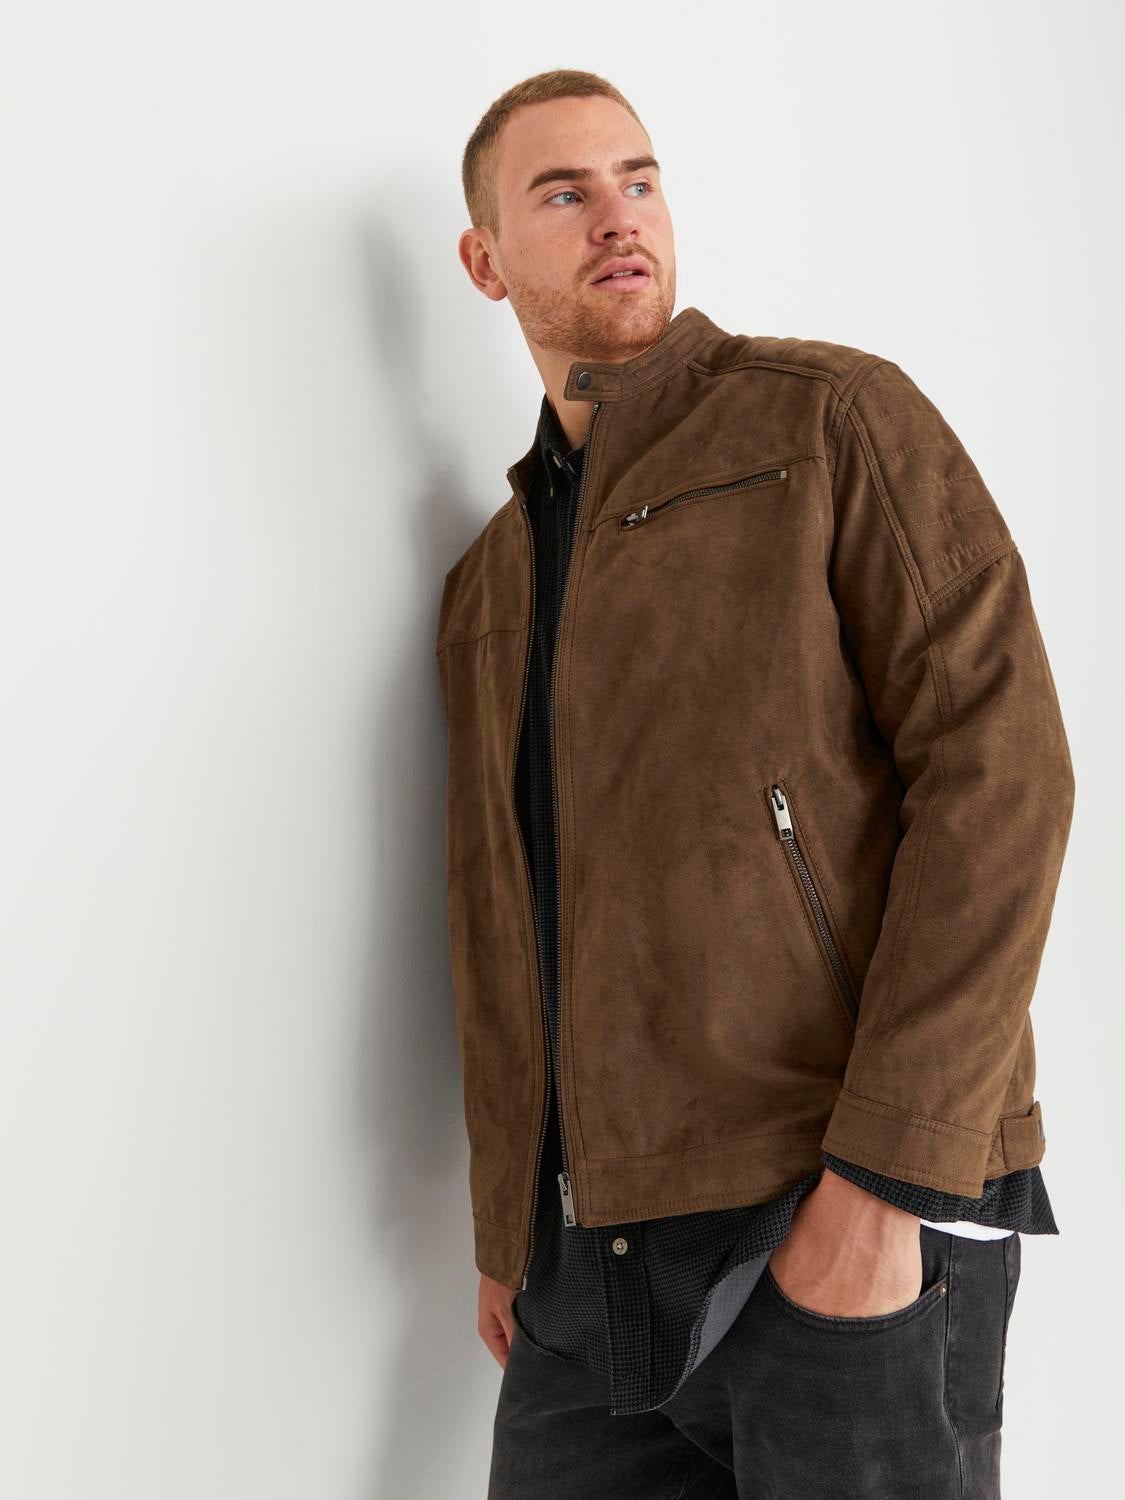 Plus Button Leather Jacket IN04 - Lewkin